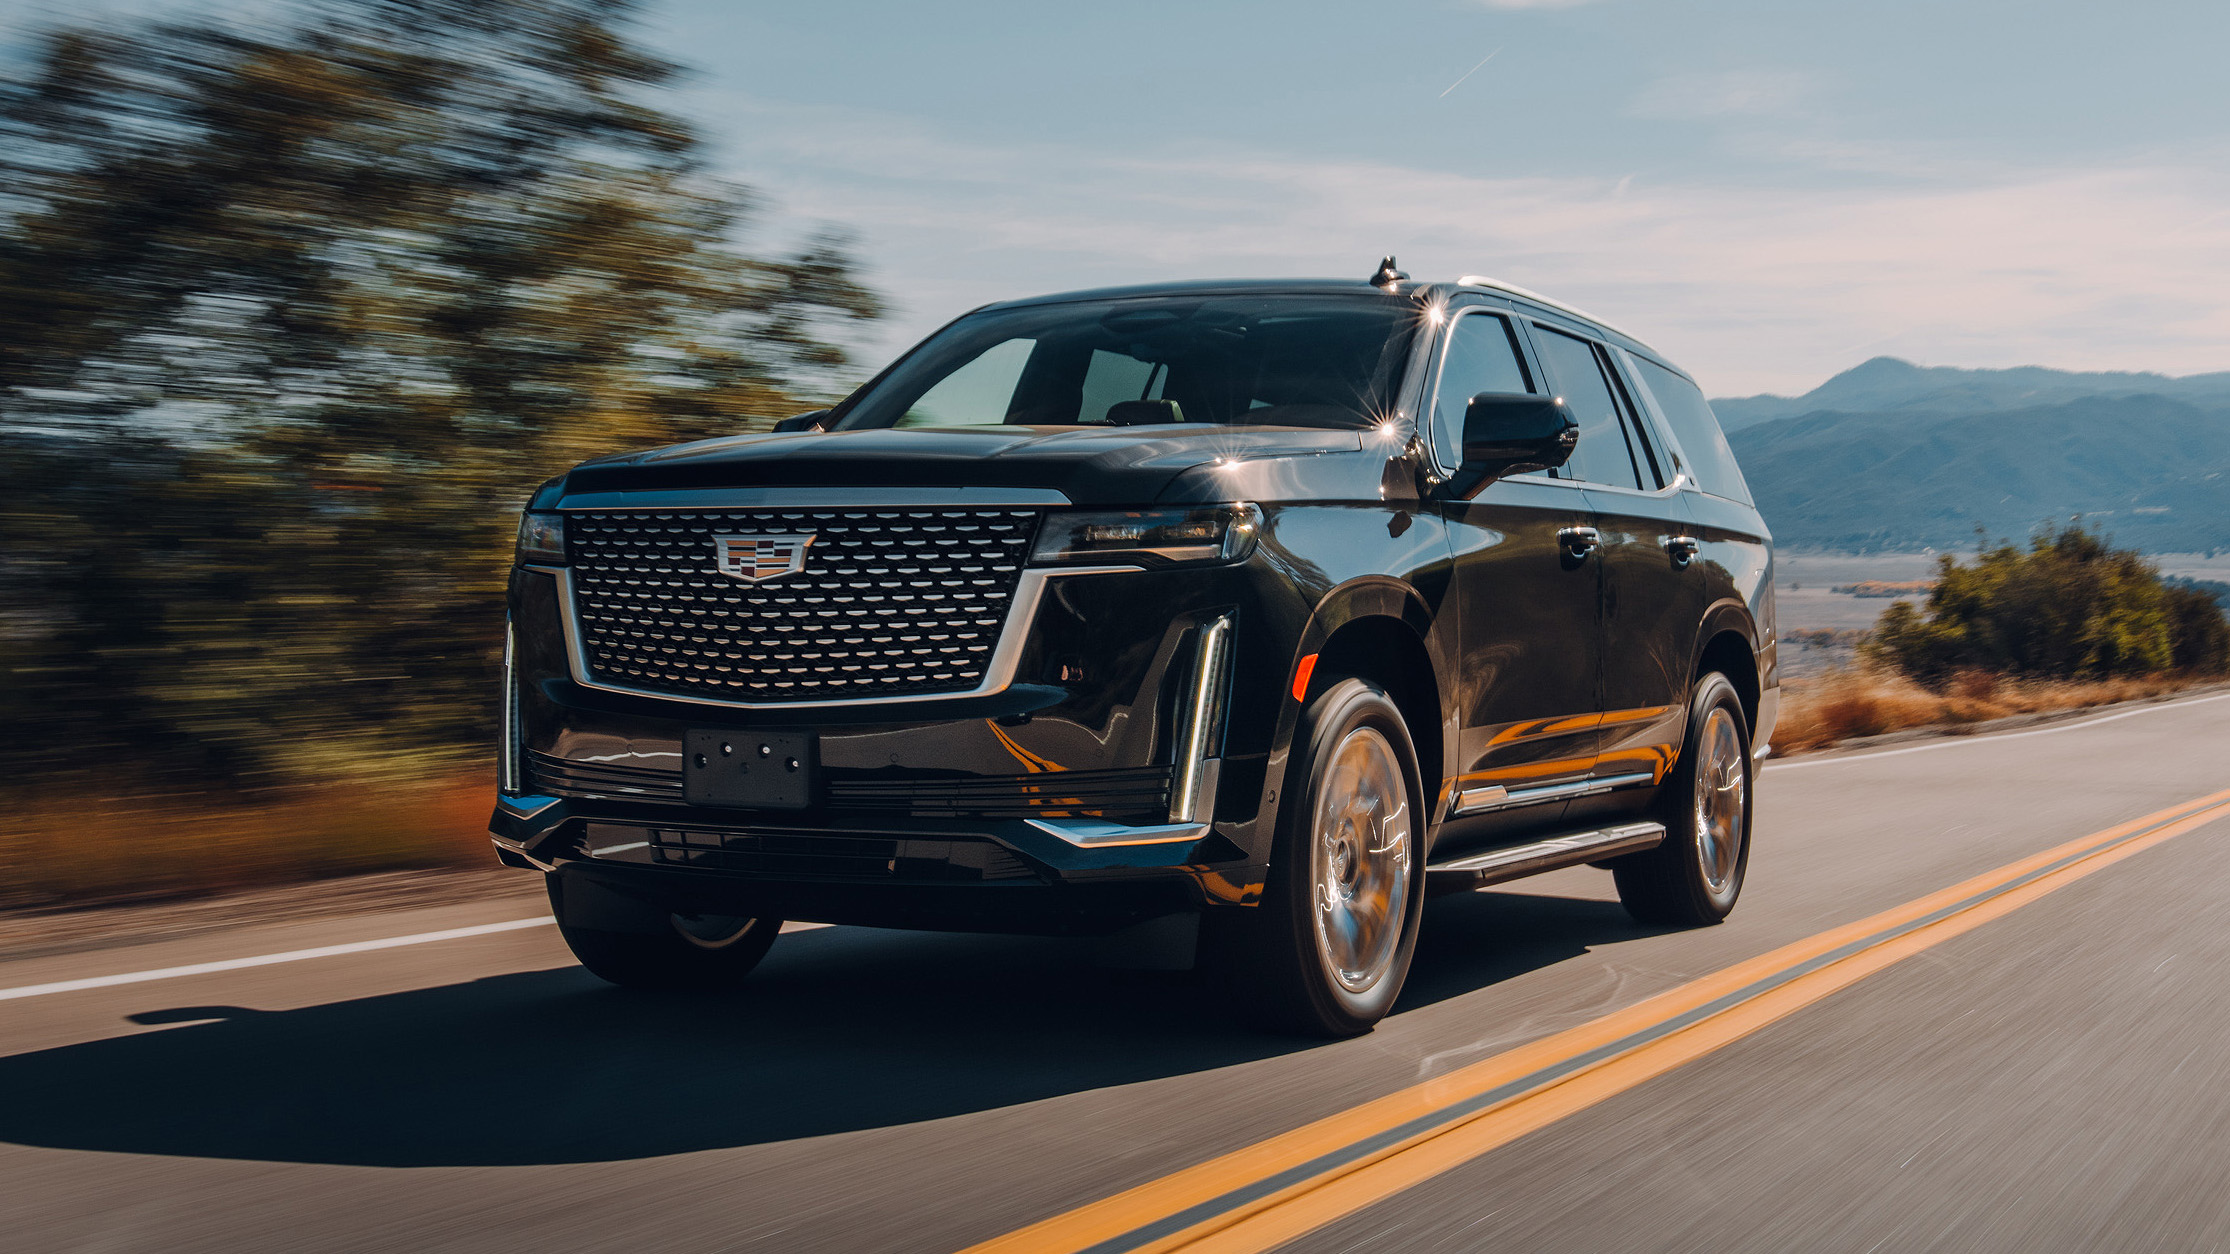 Cadillac Escalade review: America's $100k answer to the Range Rover?  Reviews 2023 | Top Gear